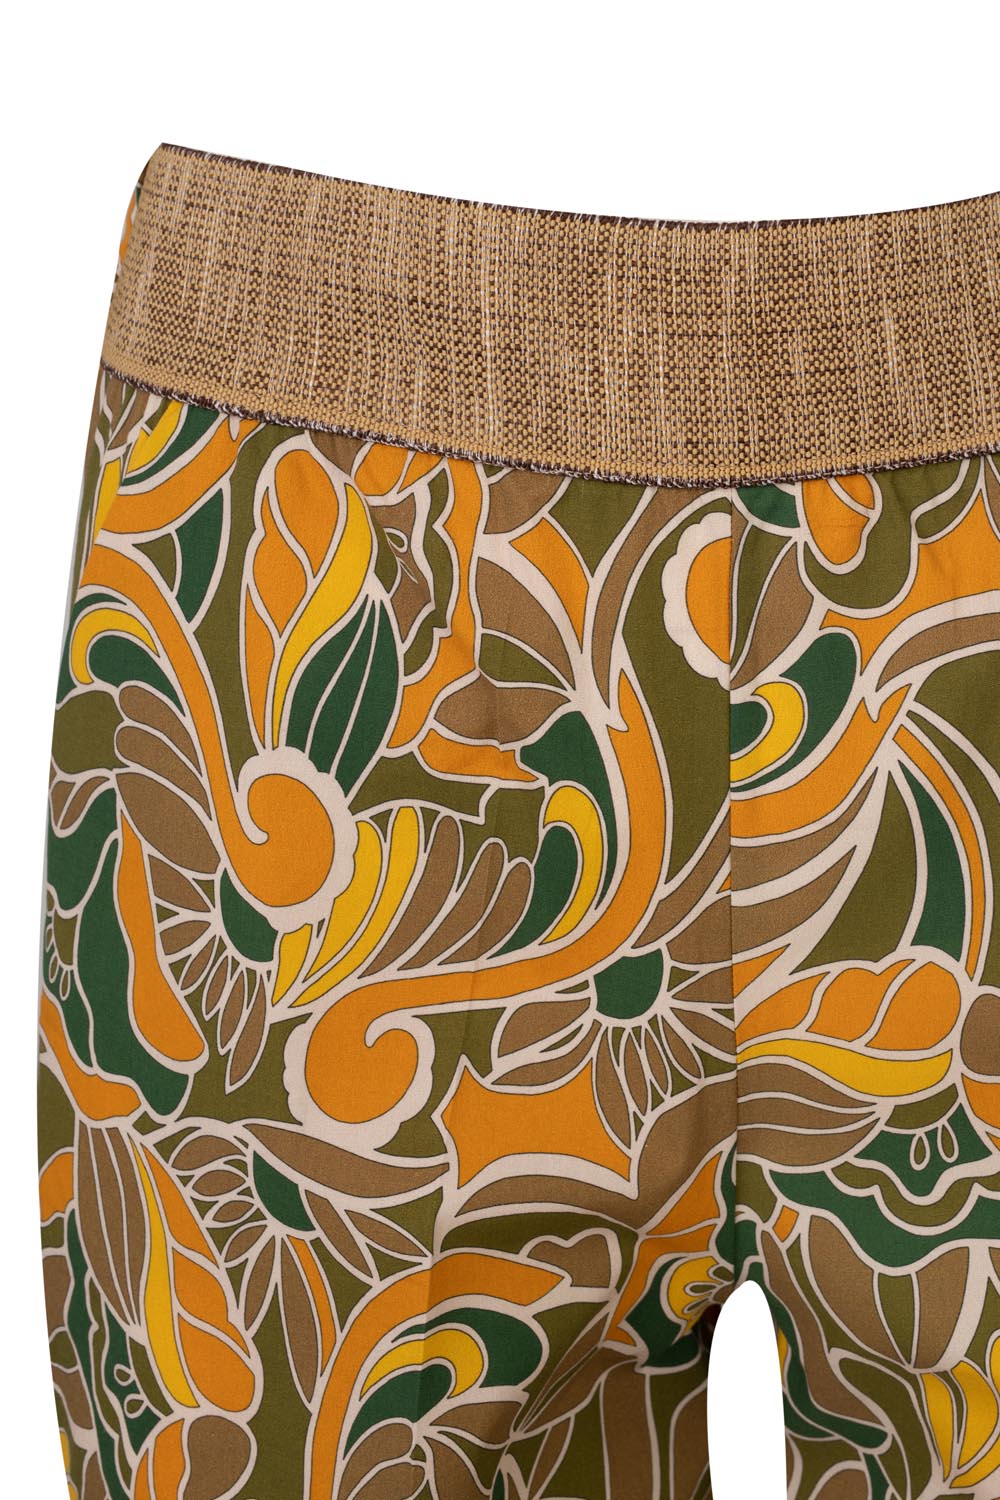 Cropped Printed Trousers with Elasticated Front “Raffia” Effect Waistband